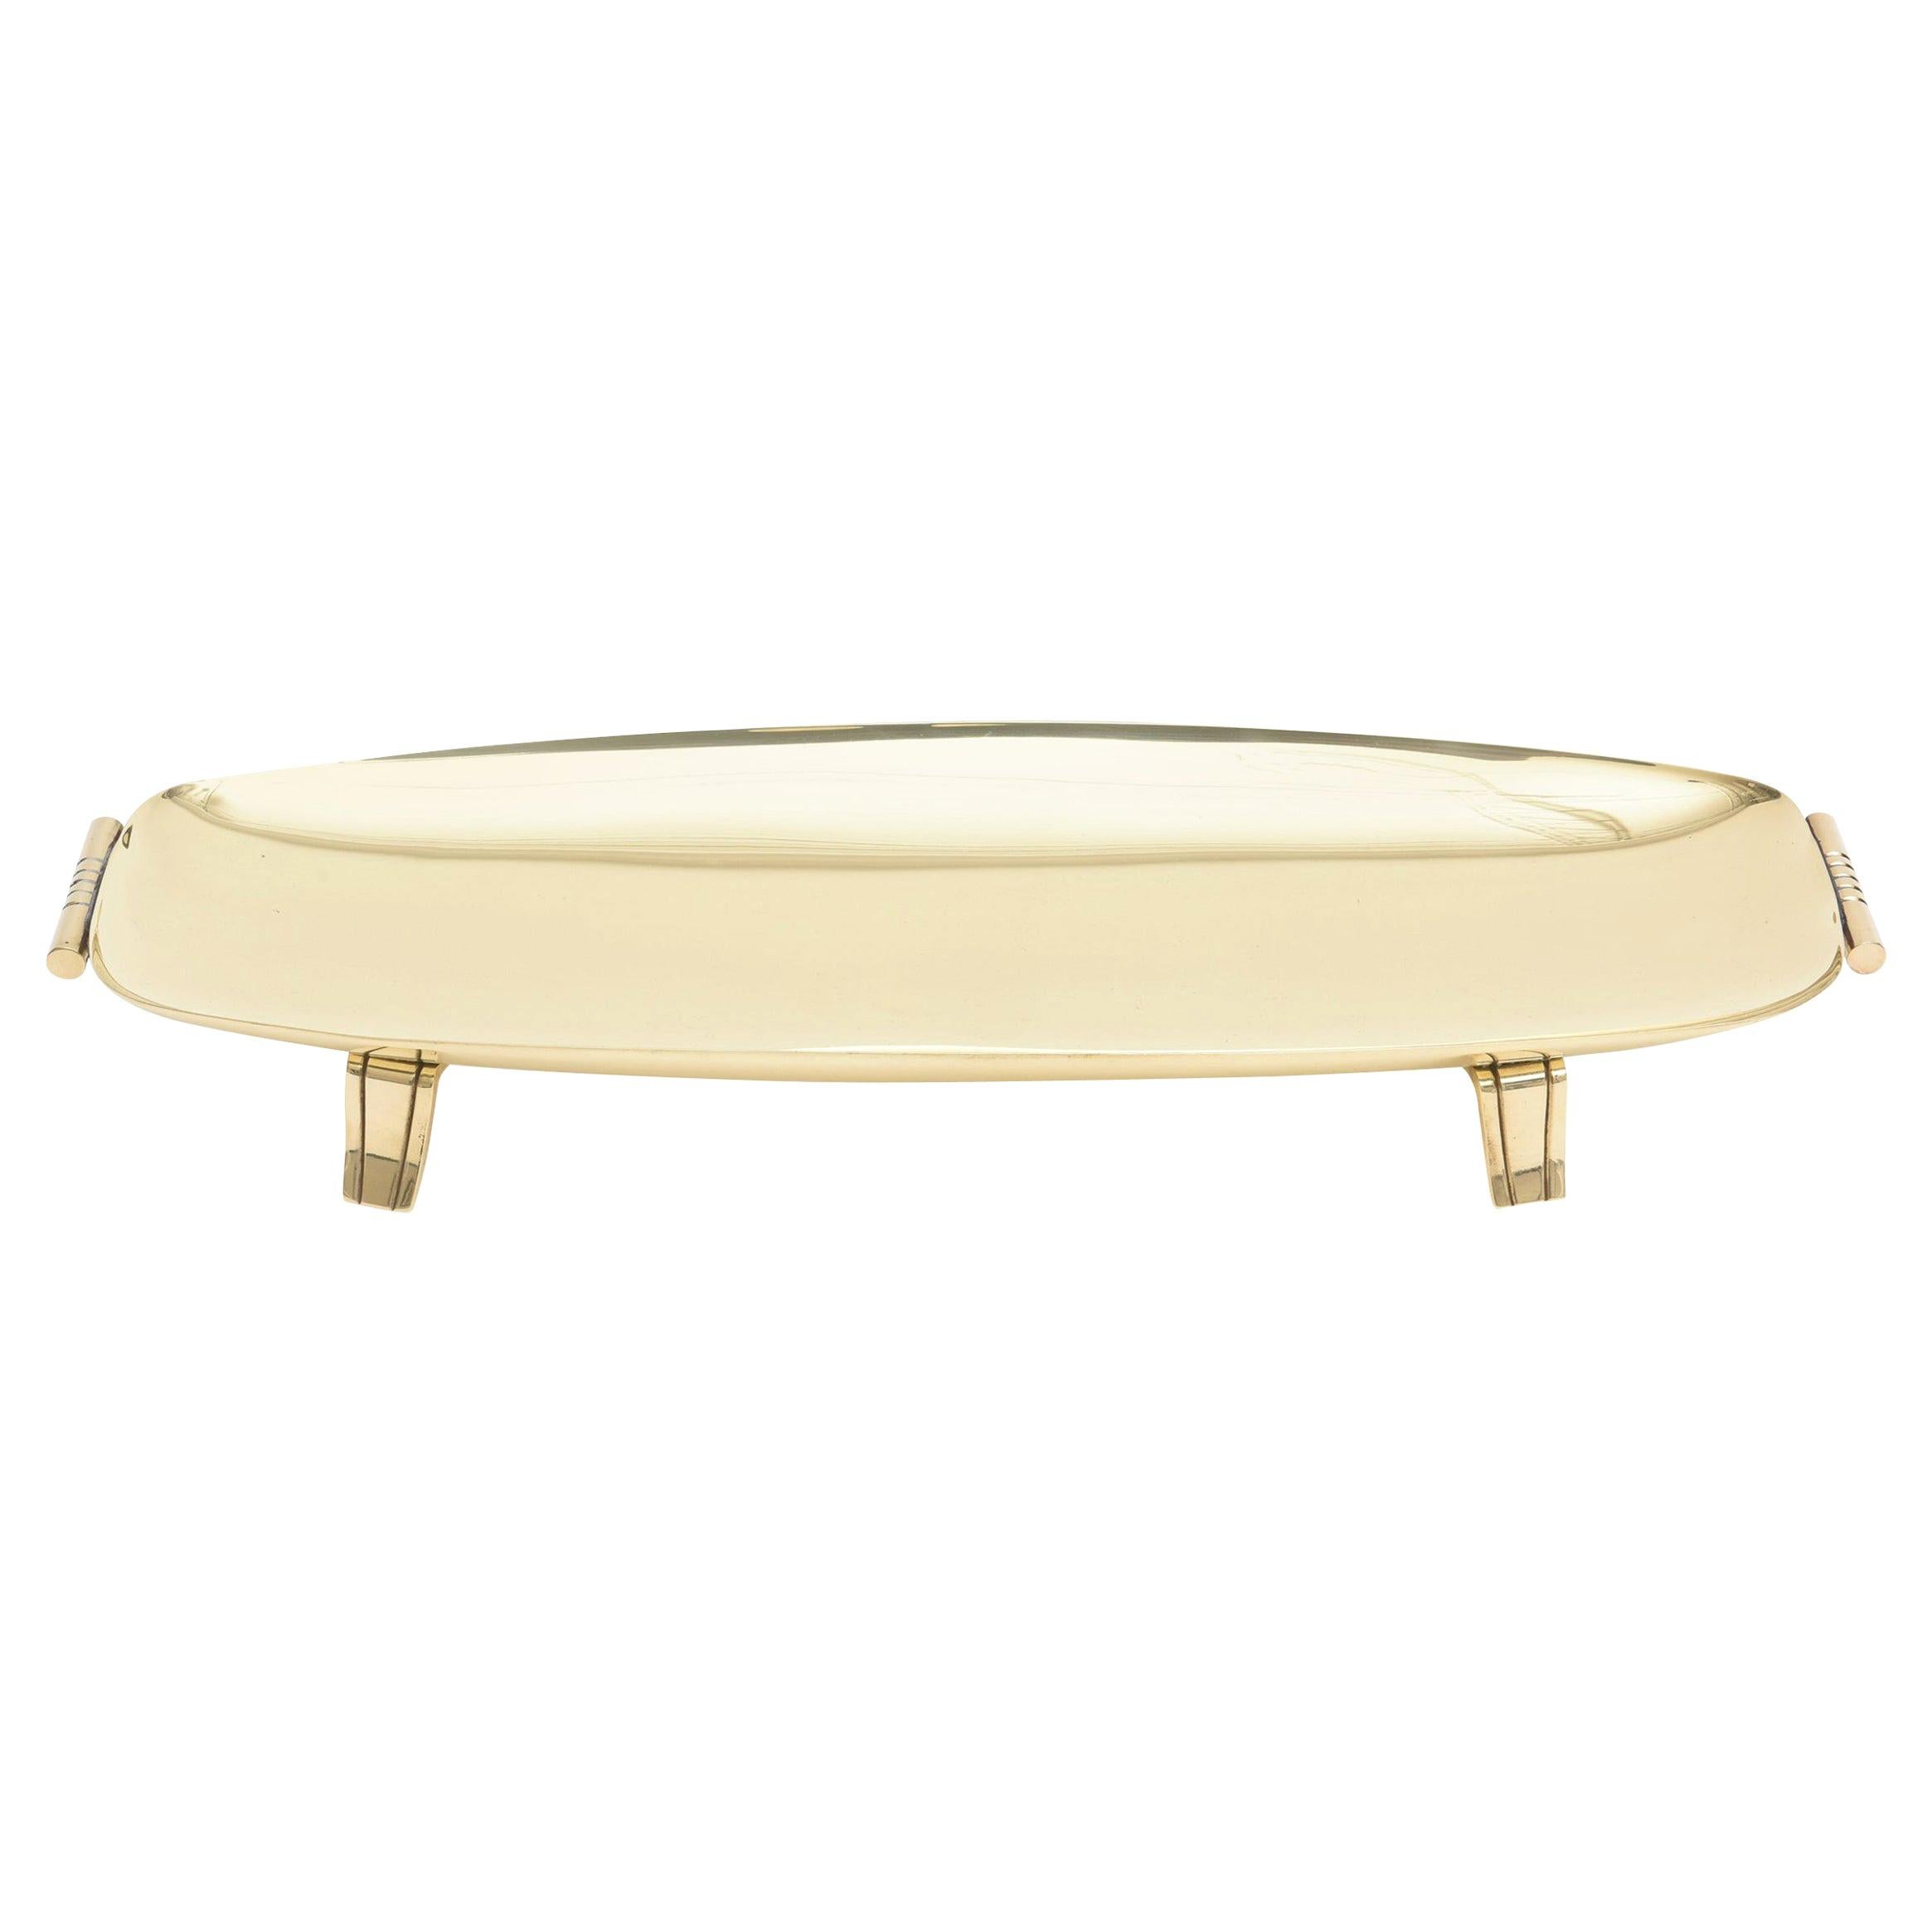 Tommi Parzinger Brass Footed Rectangular Bowl or Tray Mid-Century Modern